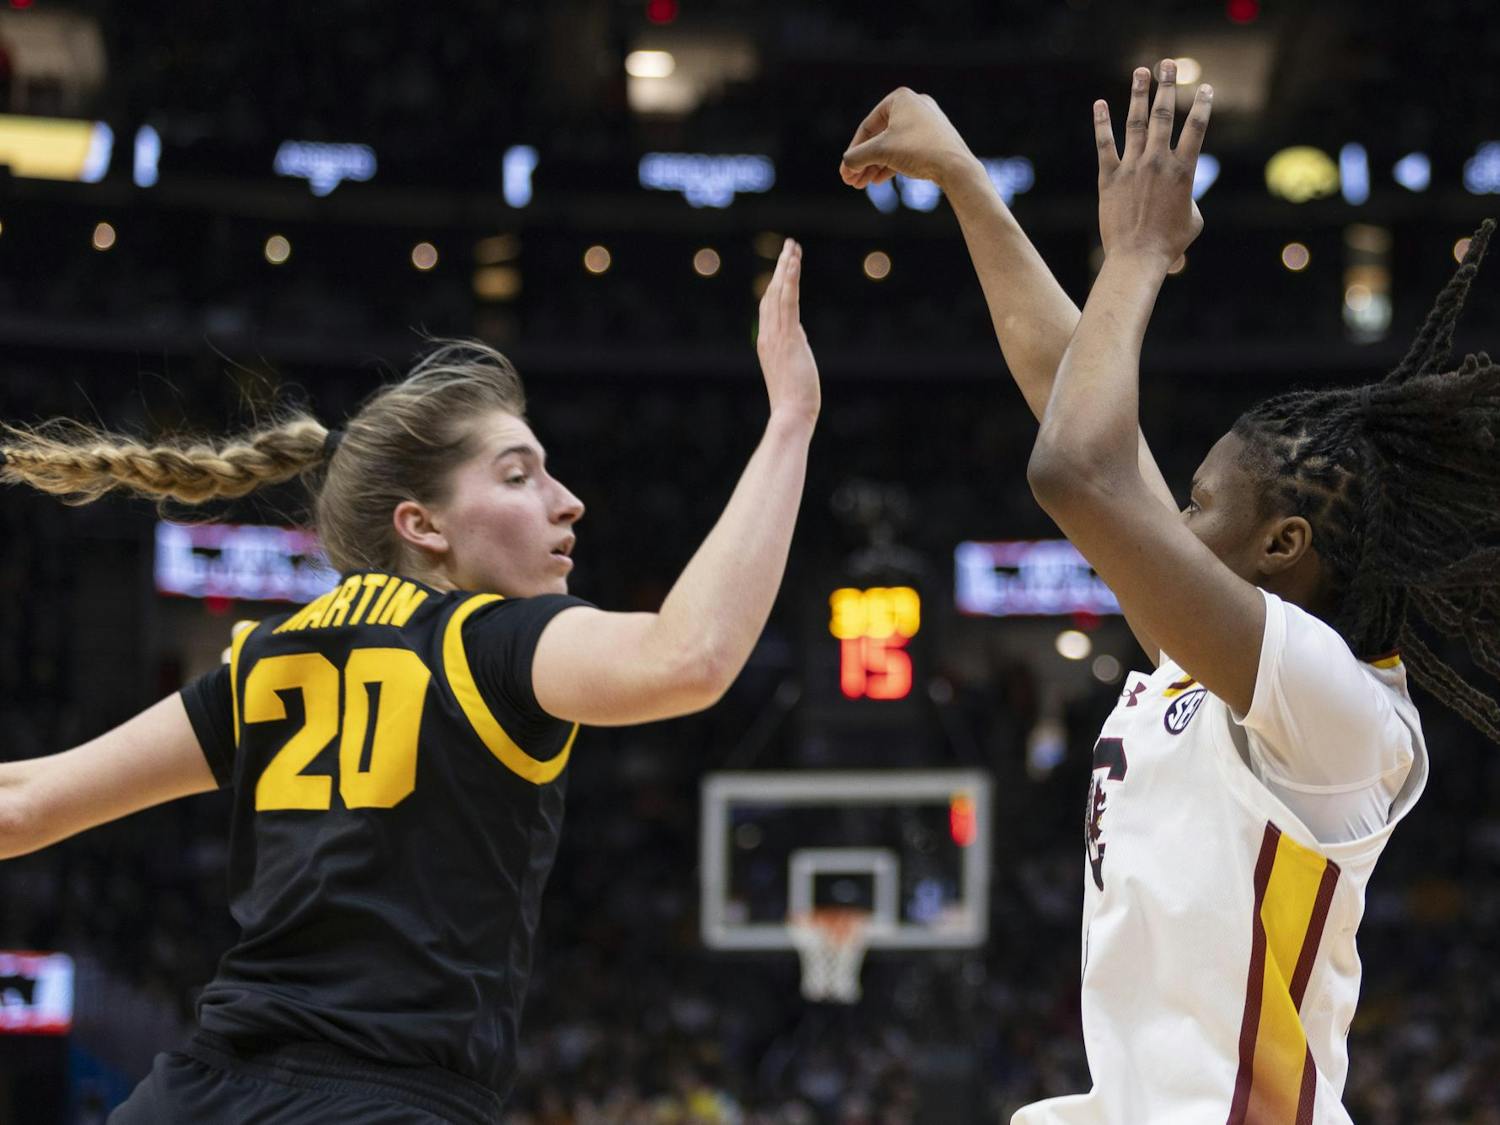 Gamecock freshman guard MiLaysia Fulwiley attempts a 3-point shot against Hawkeye graduate guard Kate Martin during the NCAA championship game on April 7, 2024. Fulwiley scored 9 points for the Gamecocks enroute to the team's 87-75 victory.